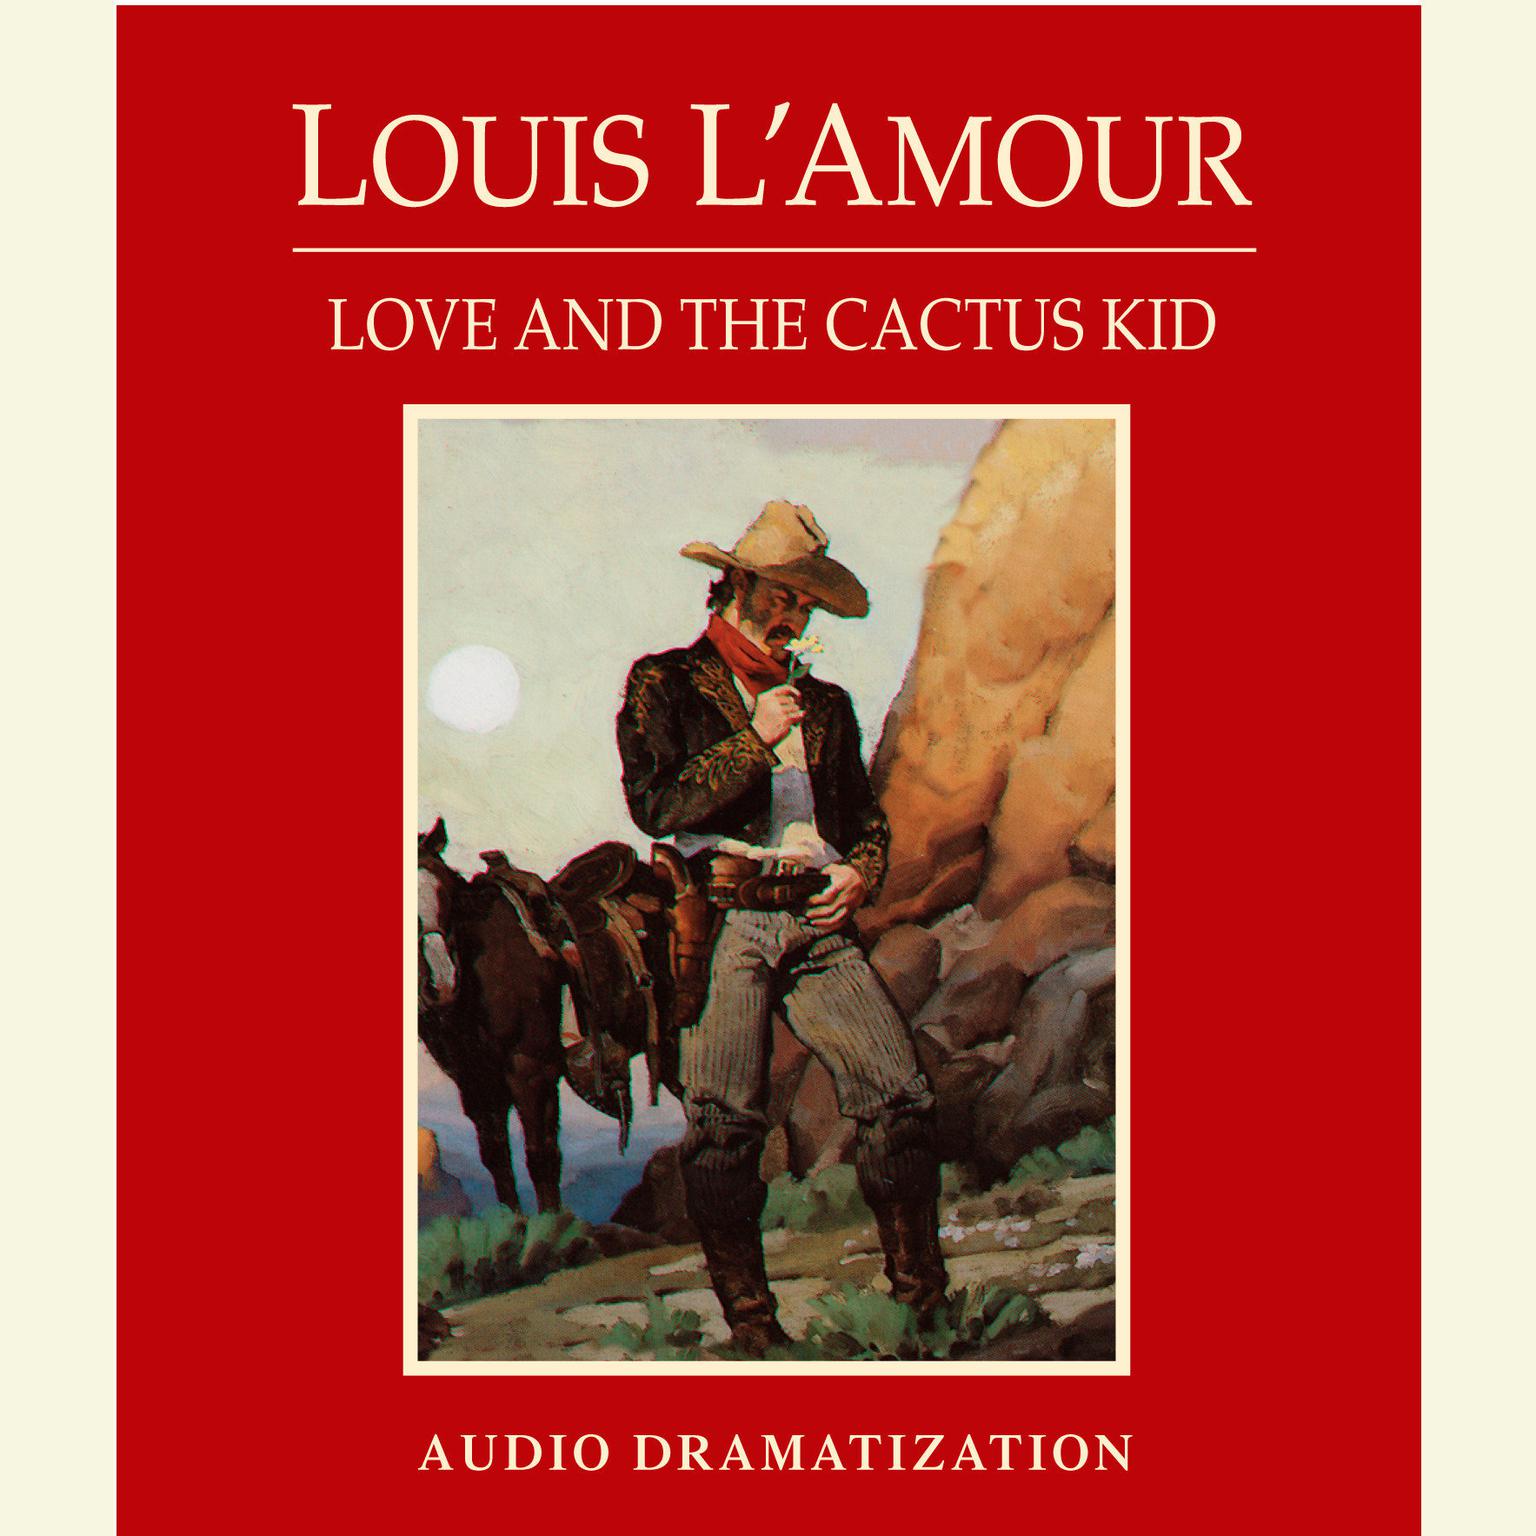 Love and the Cactus Kid (Abridged) Audiobook, by Louis L’Amour